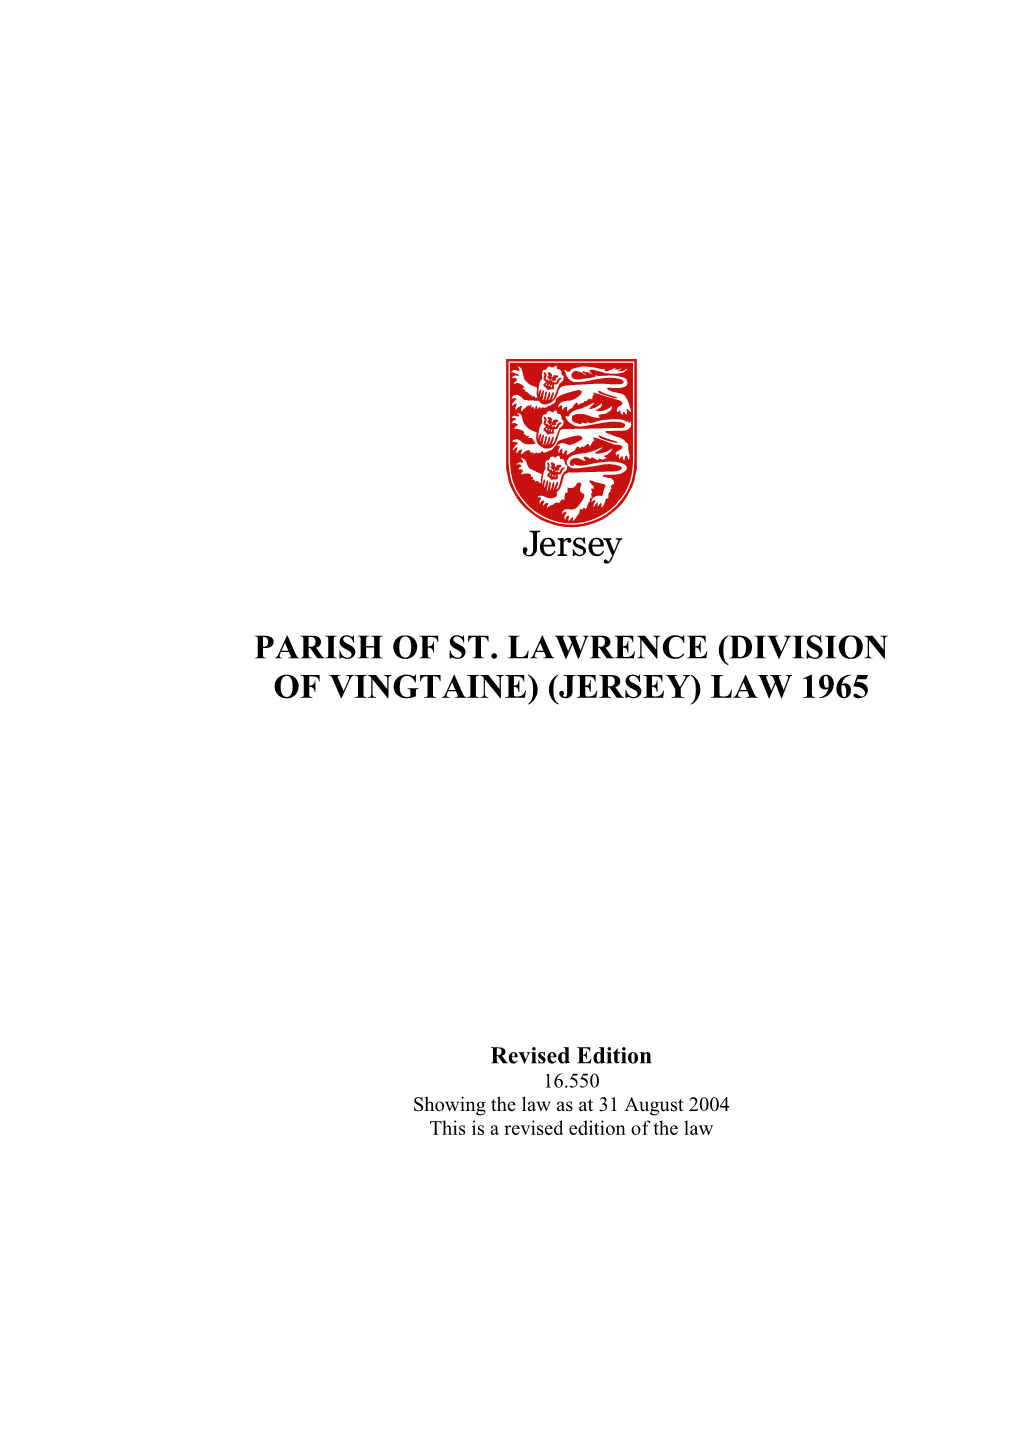 Parish of St. Lawrence (Division of Vingtaine) (Jersey) Law 1965